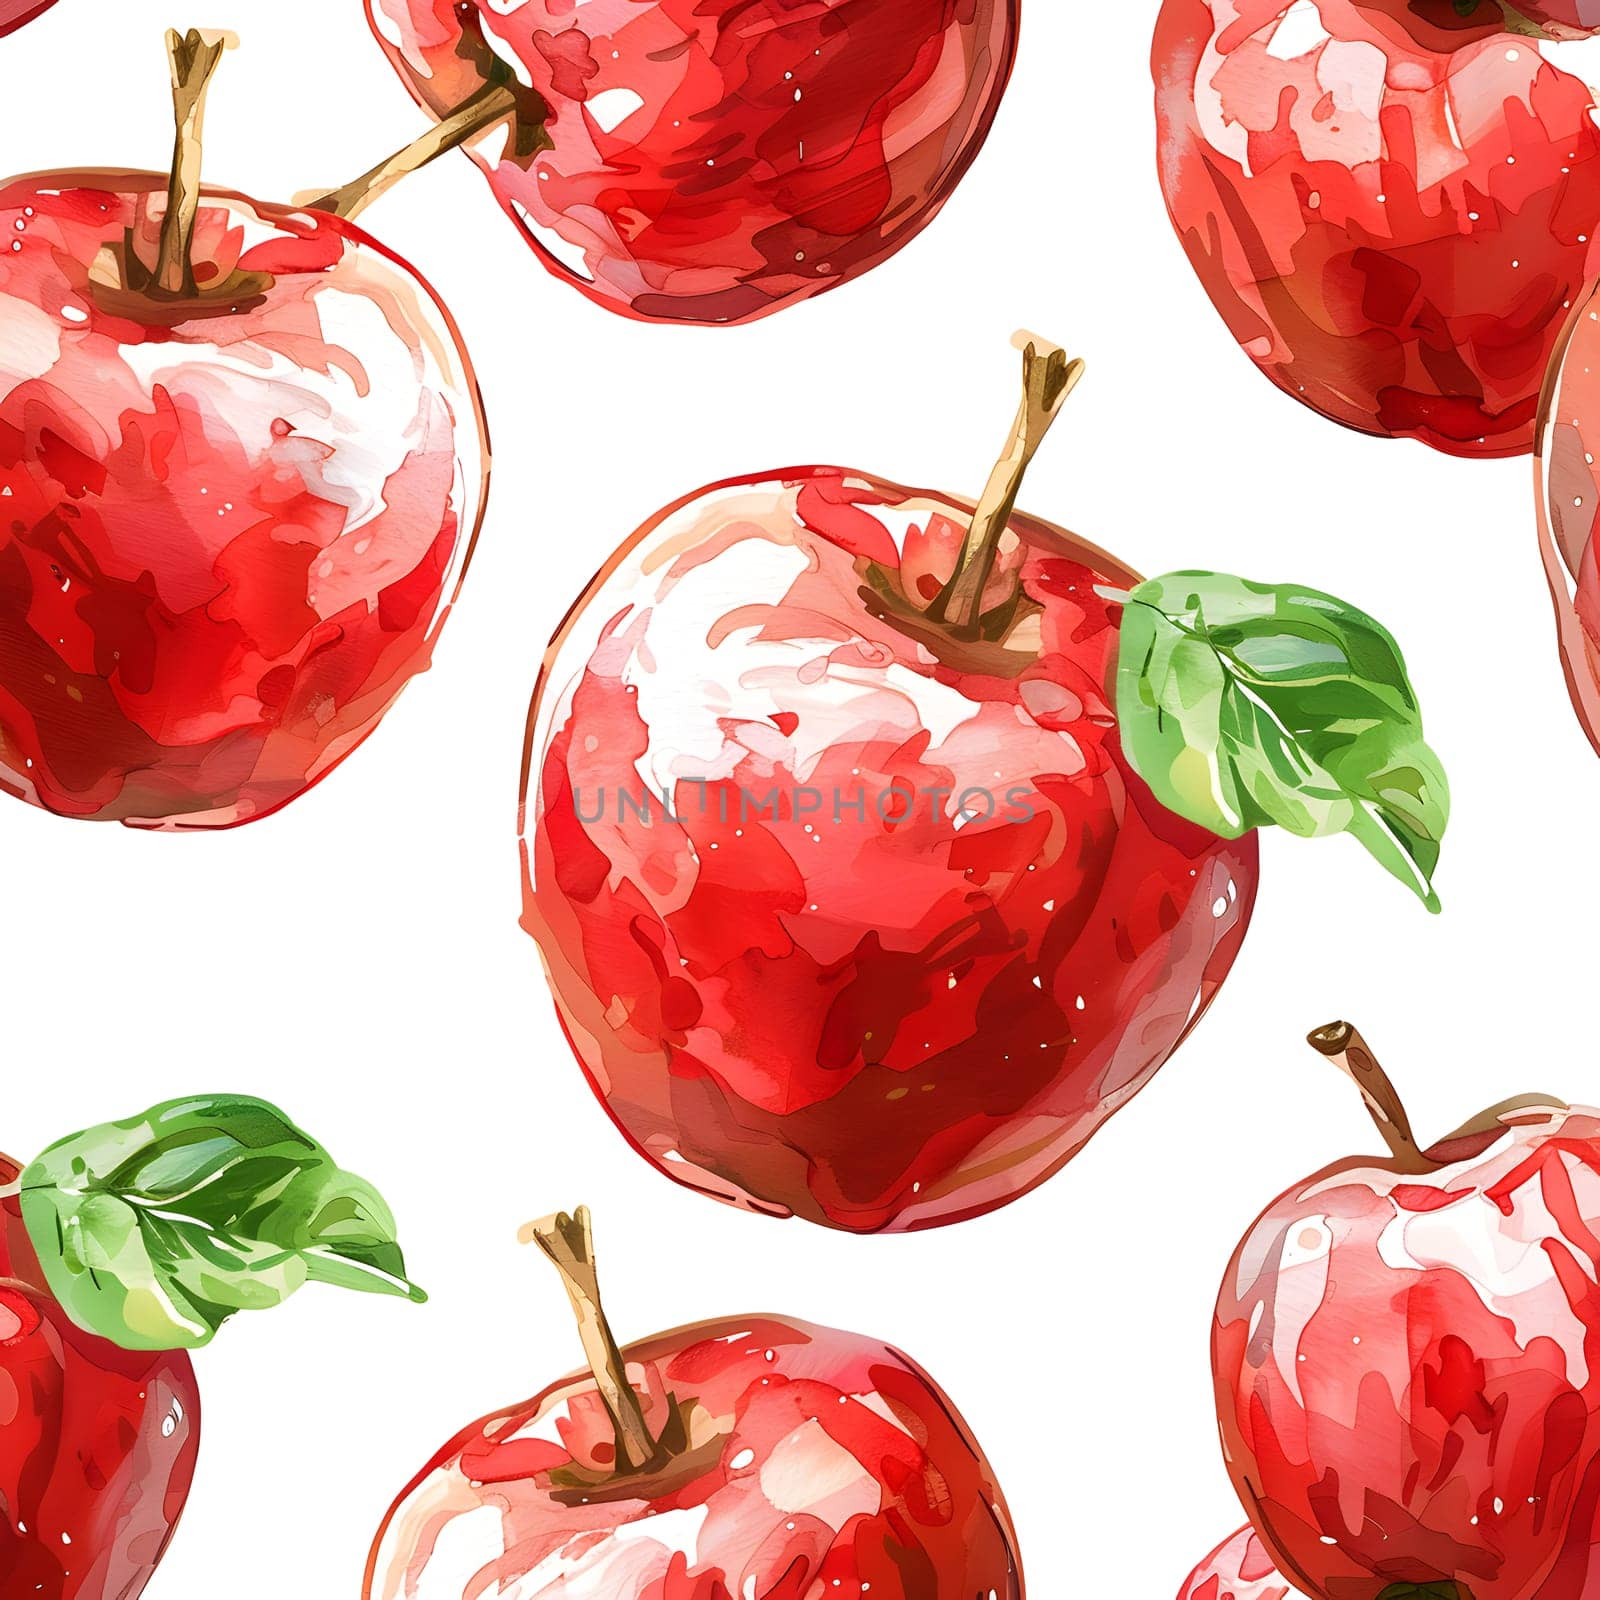 a seamless pattern of red apples with green leaves on a white background by Nadtochiy